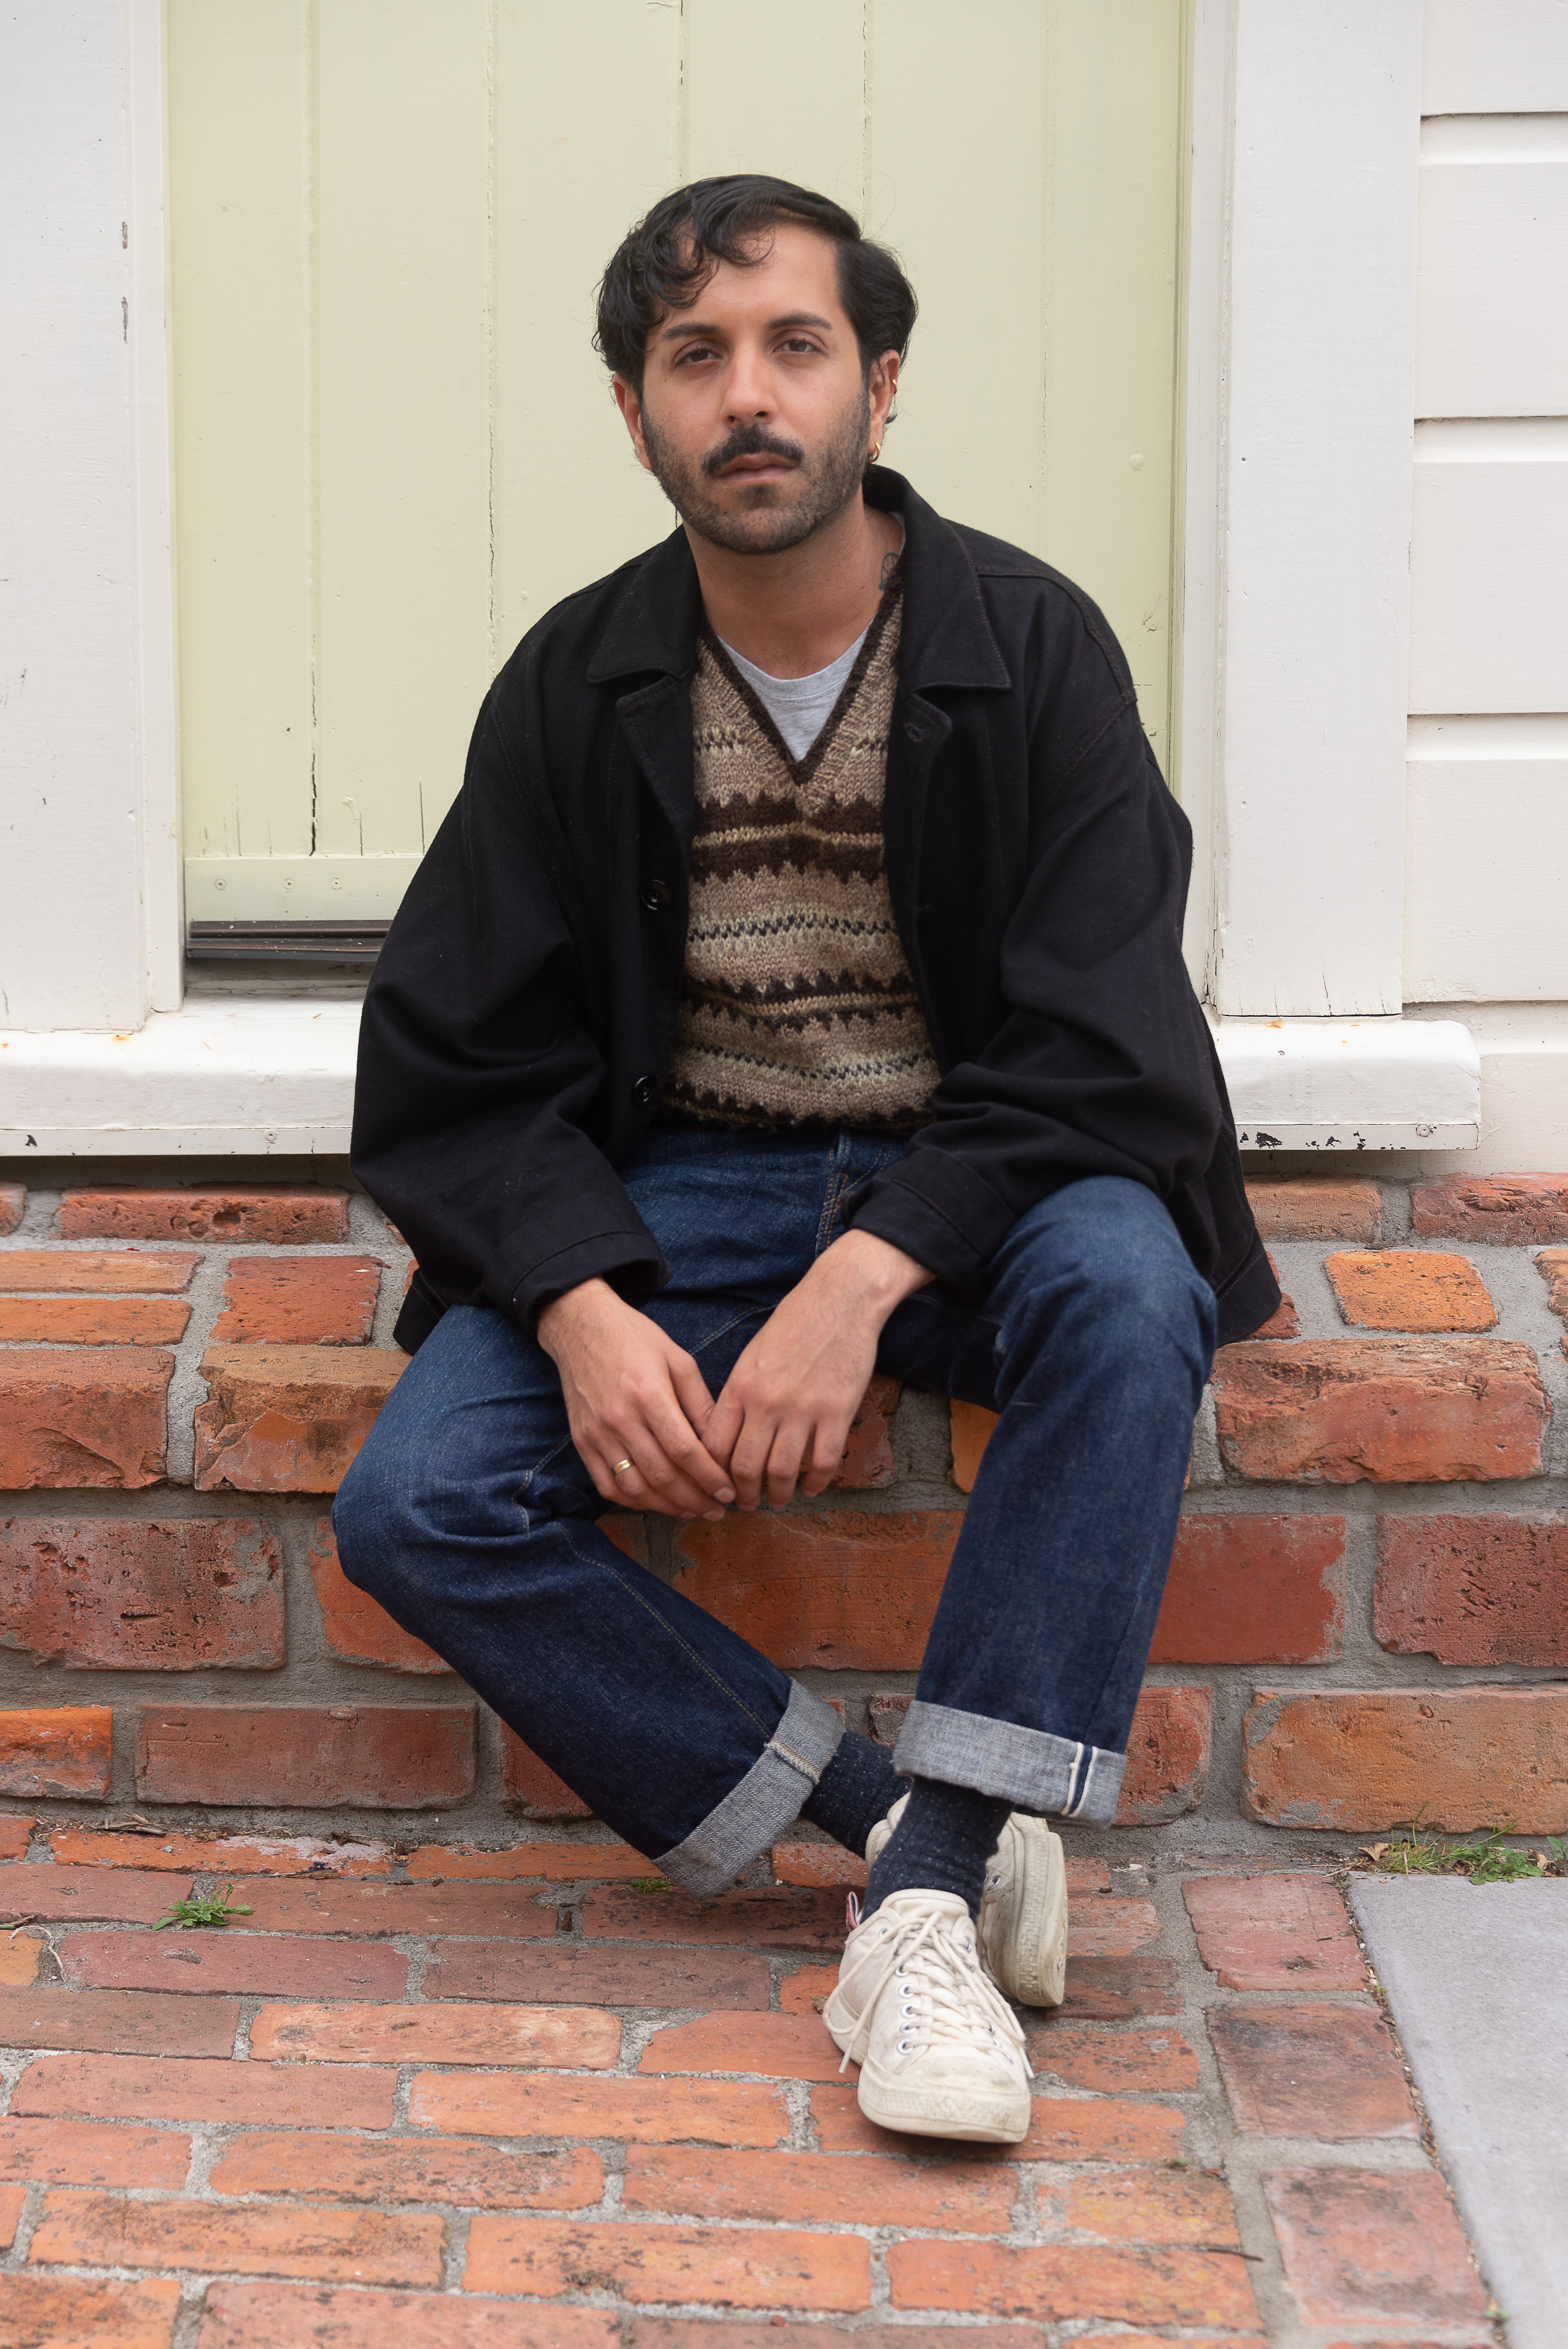 A person sitting on a brick door step in front of a pale yellow door. They have a beard and are wearing white shoes, blue jeans, a brown patterned jumper and a black jacket.